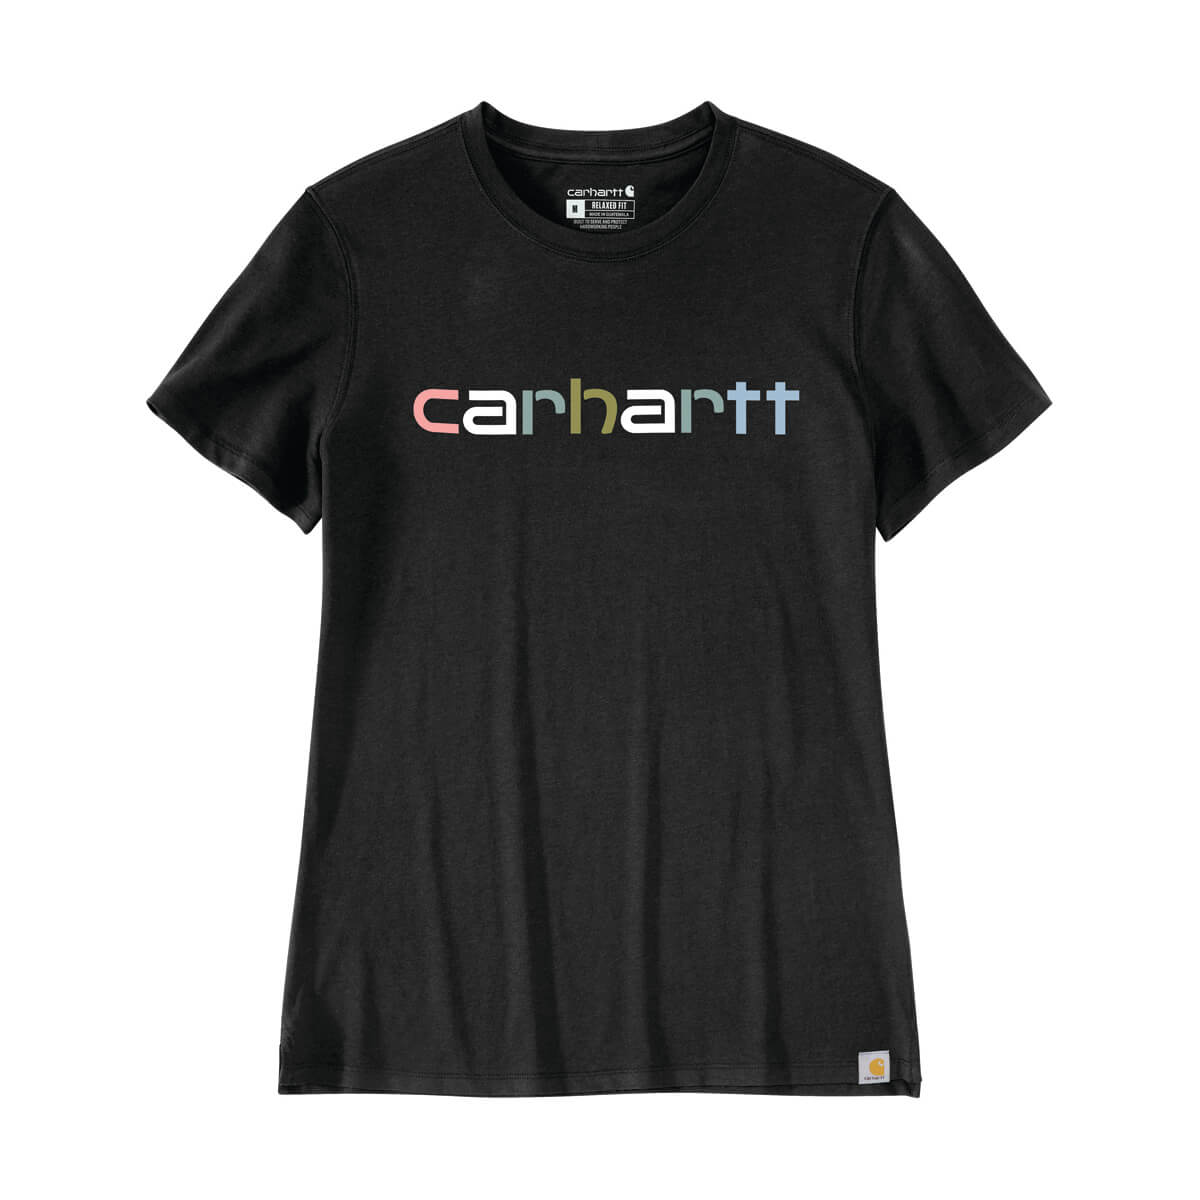 Carhartt Relaxed Fit Lightweight Short-Sleeve Multi Color Logo Graphic T-Shirt - Black